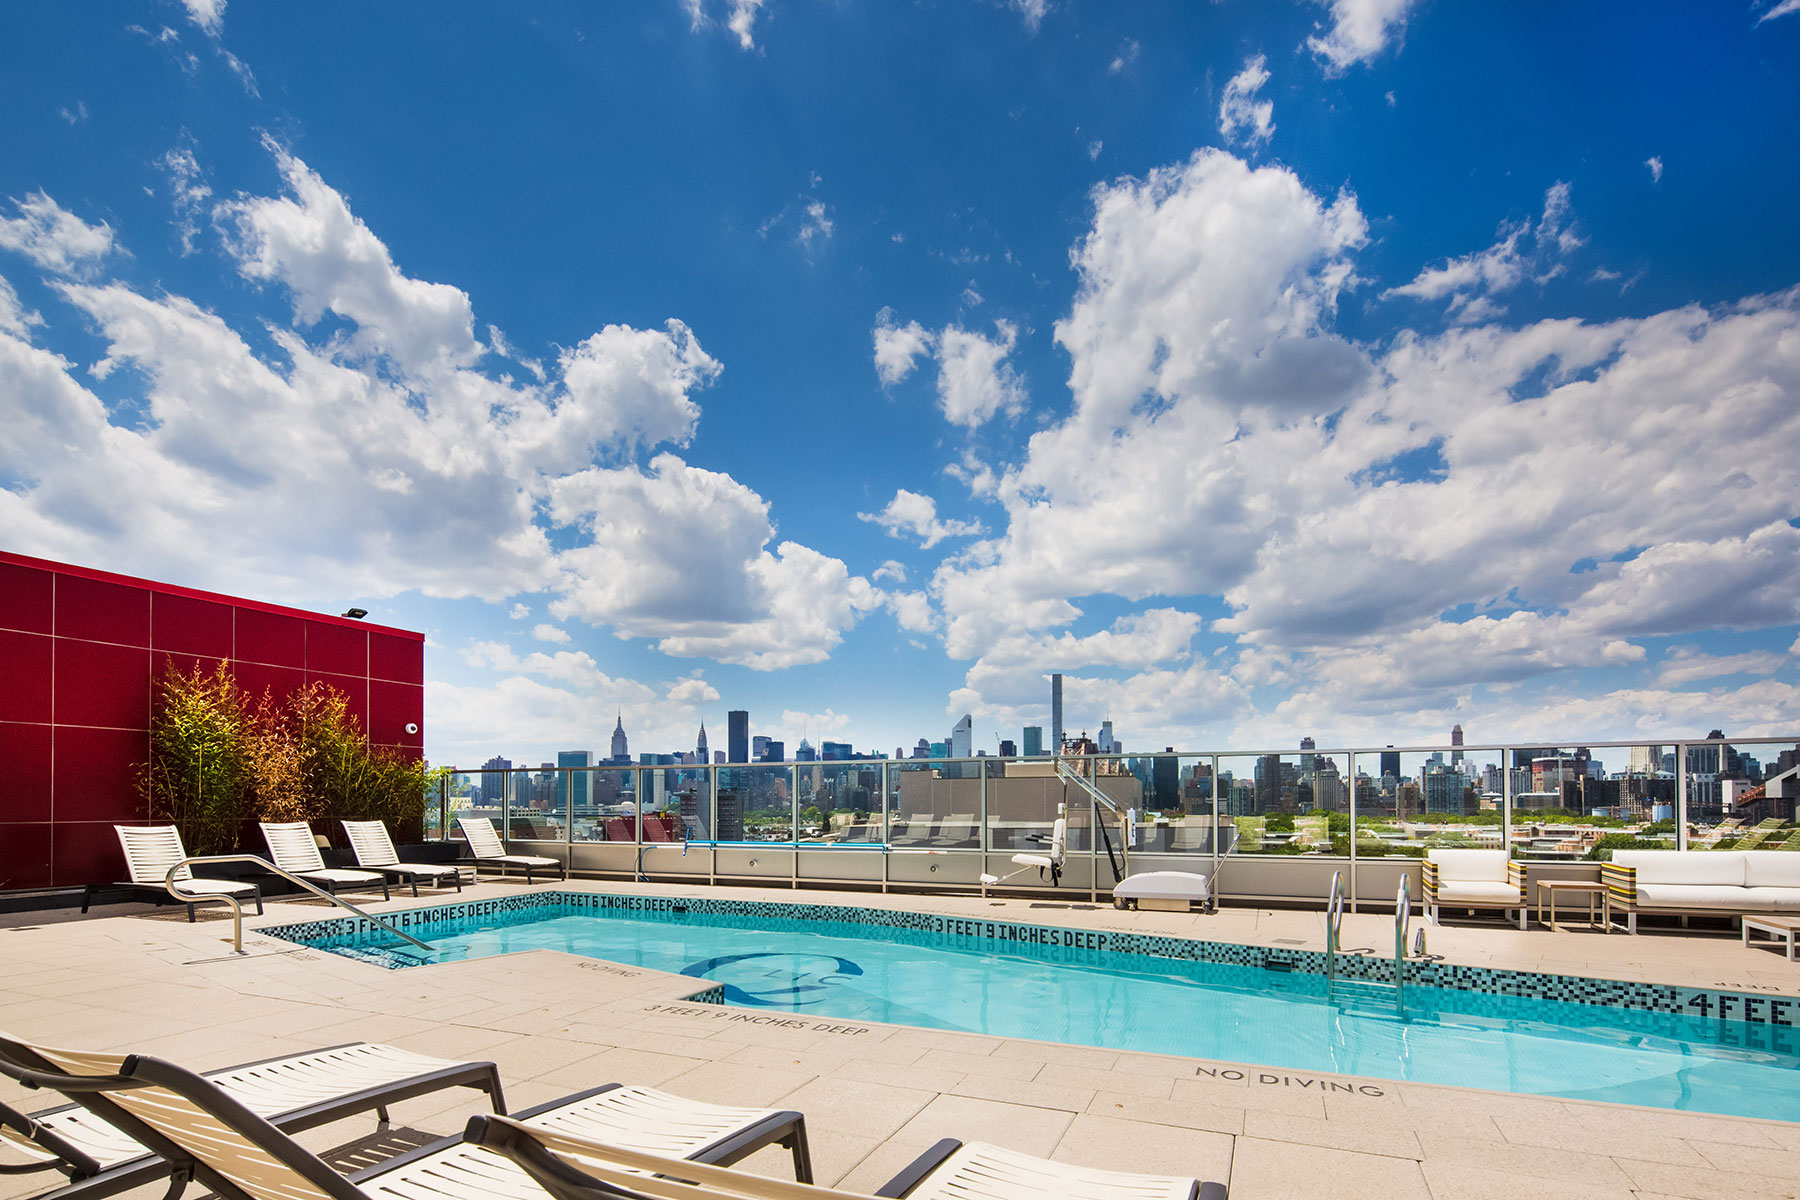 Residential Buildings With Rooftop Pools - QLIC 4142 24th Street - World Wide Group